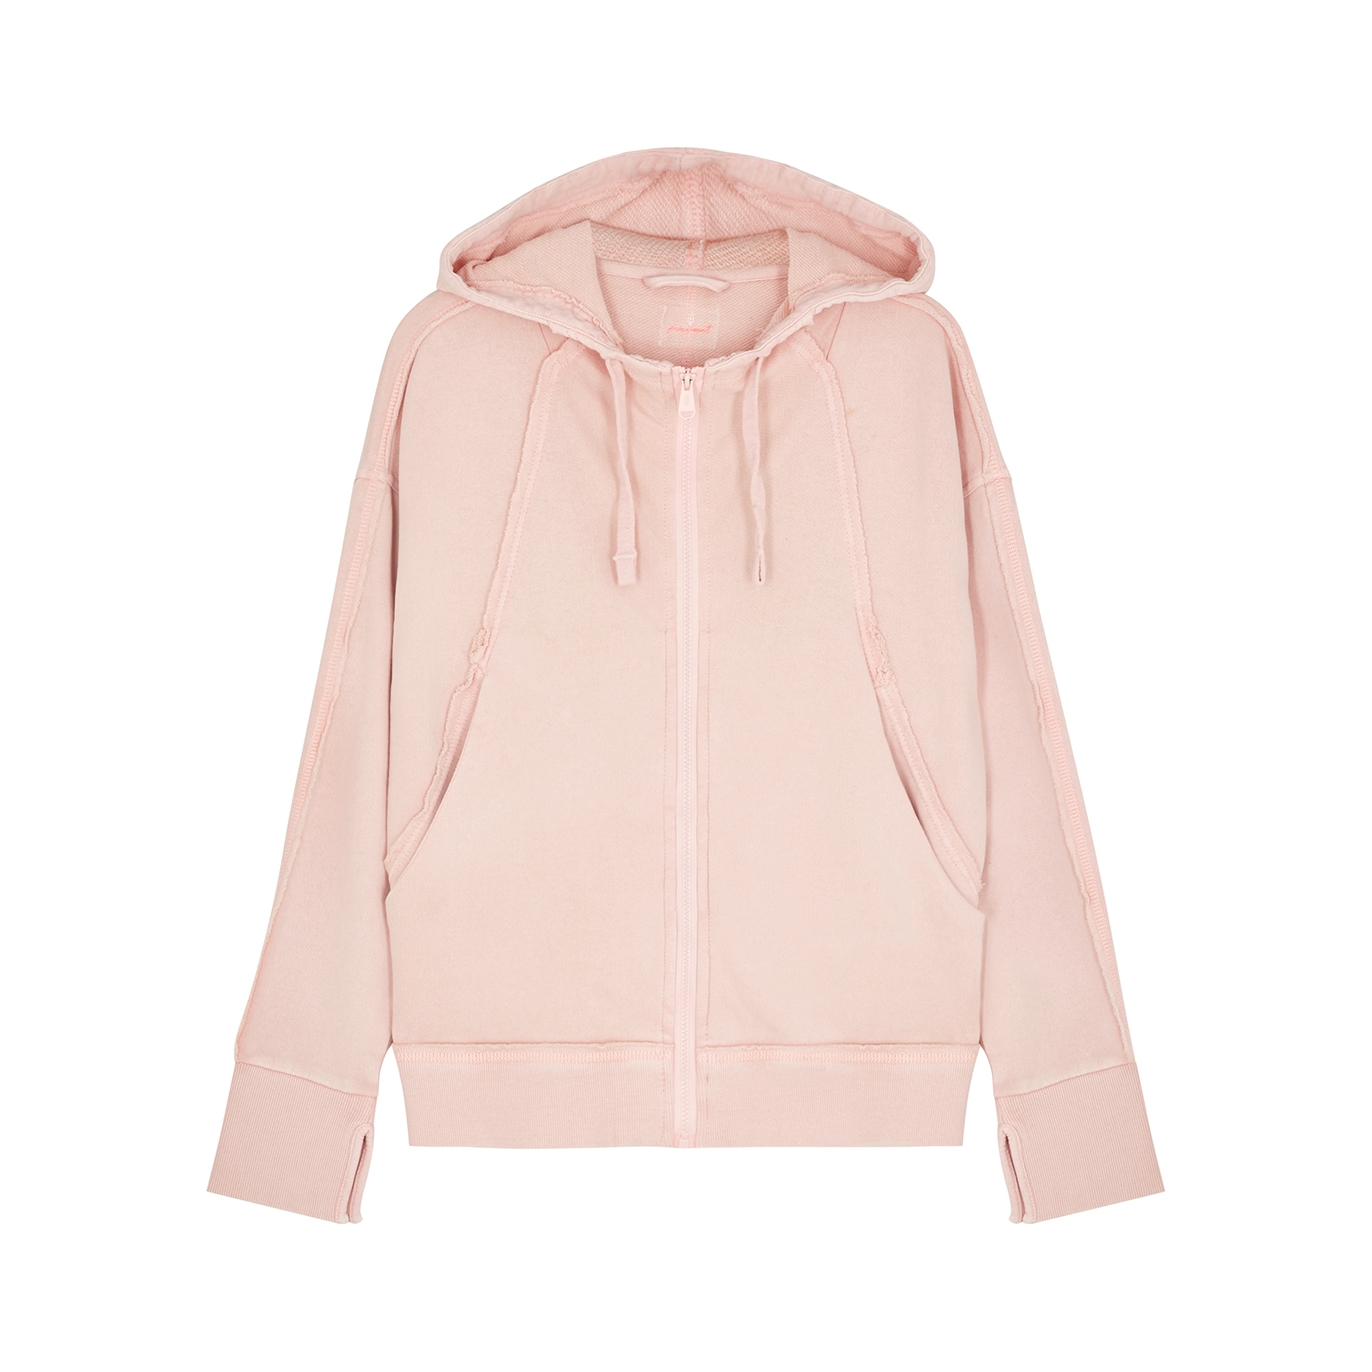 Free People Movement Only One Pink Hooded Cotton Sweatshirt